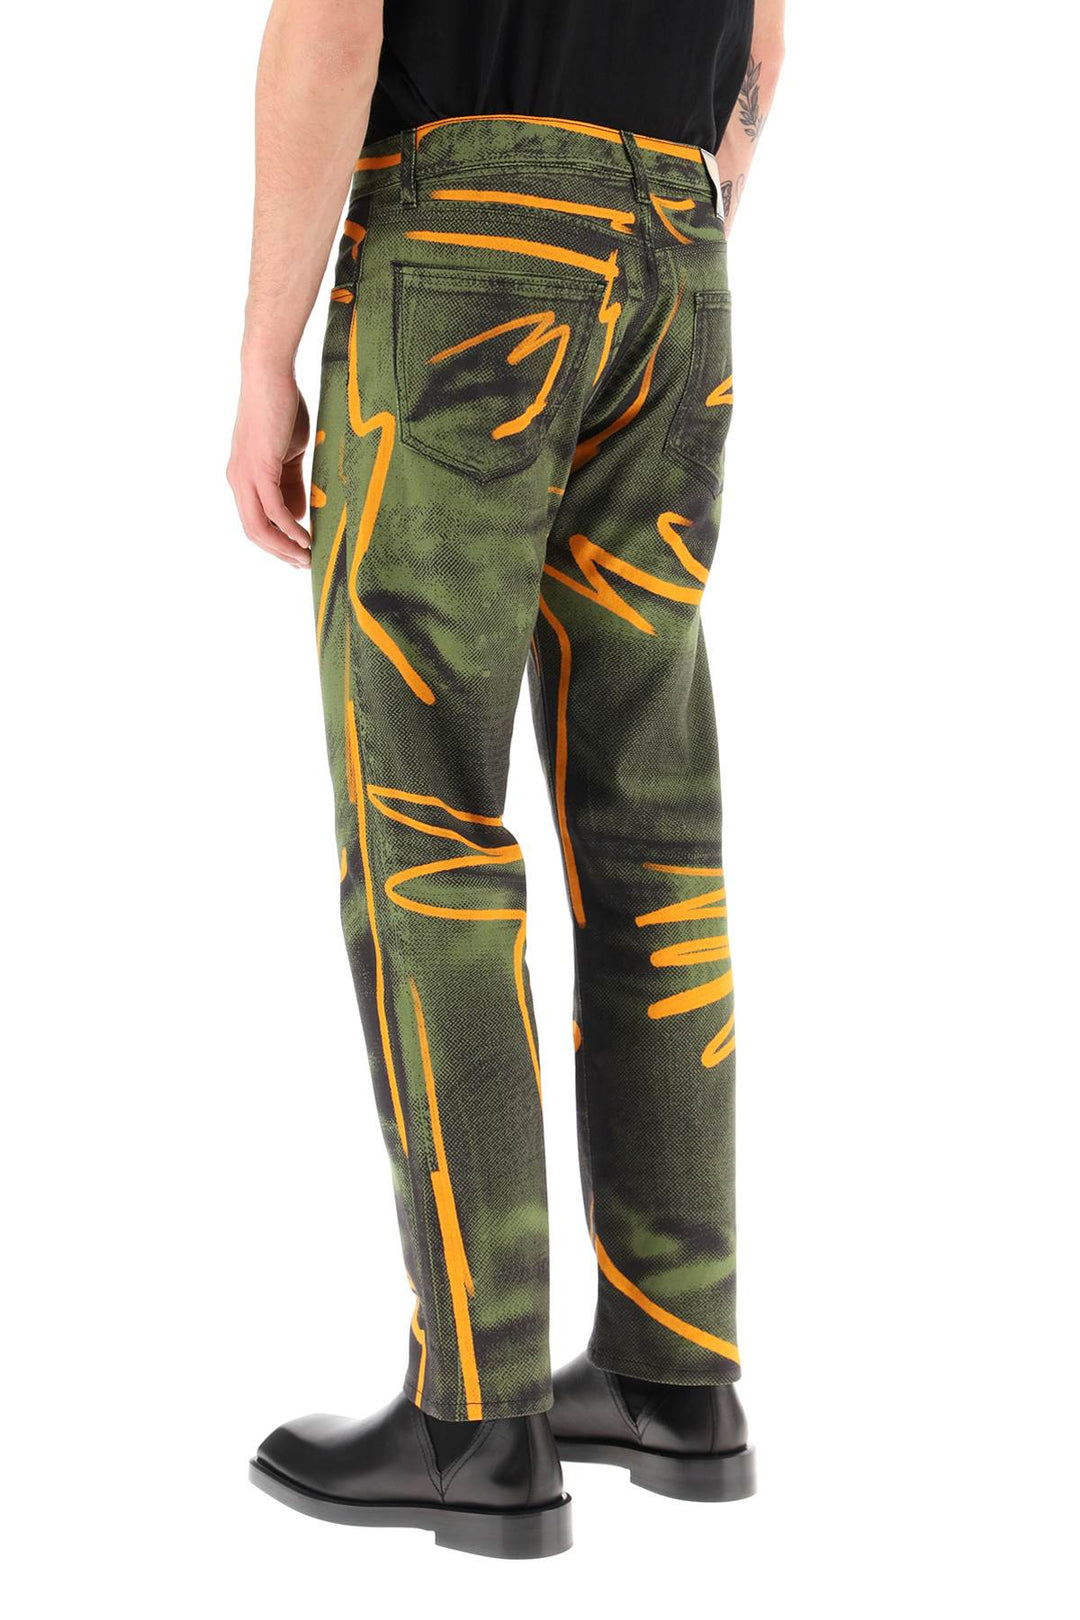 Moschino Shadows & Squiggles Cotton Pants   Verde